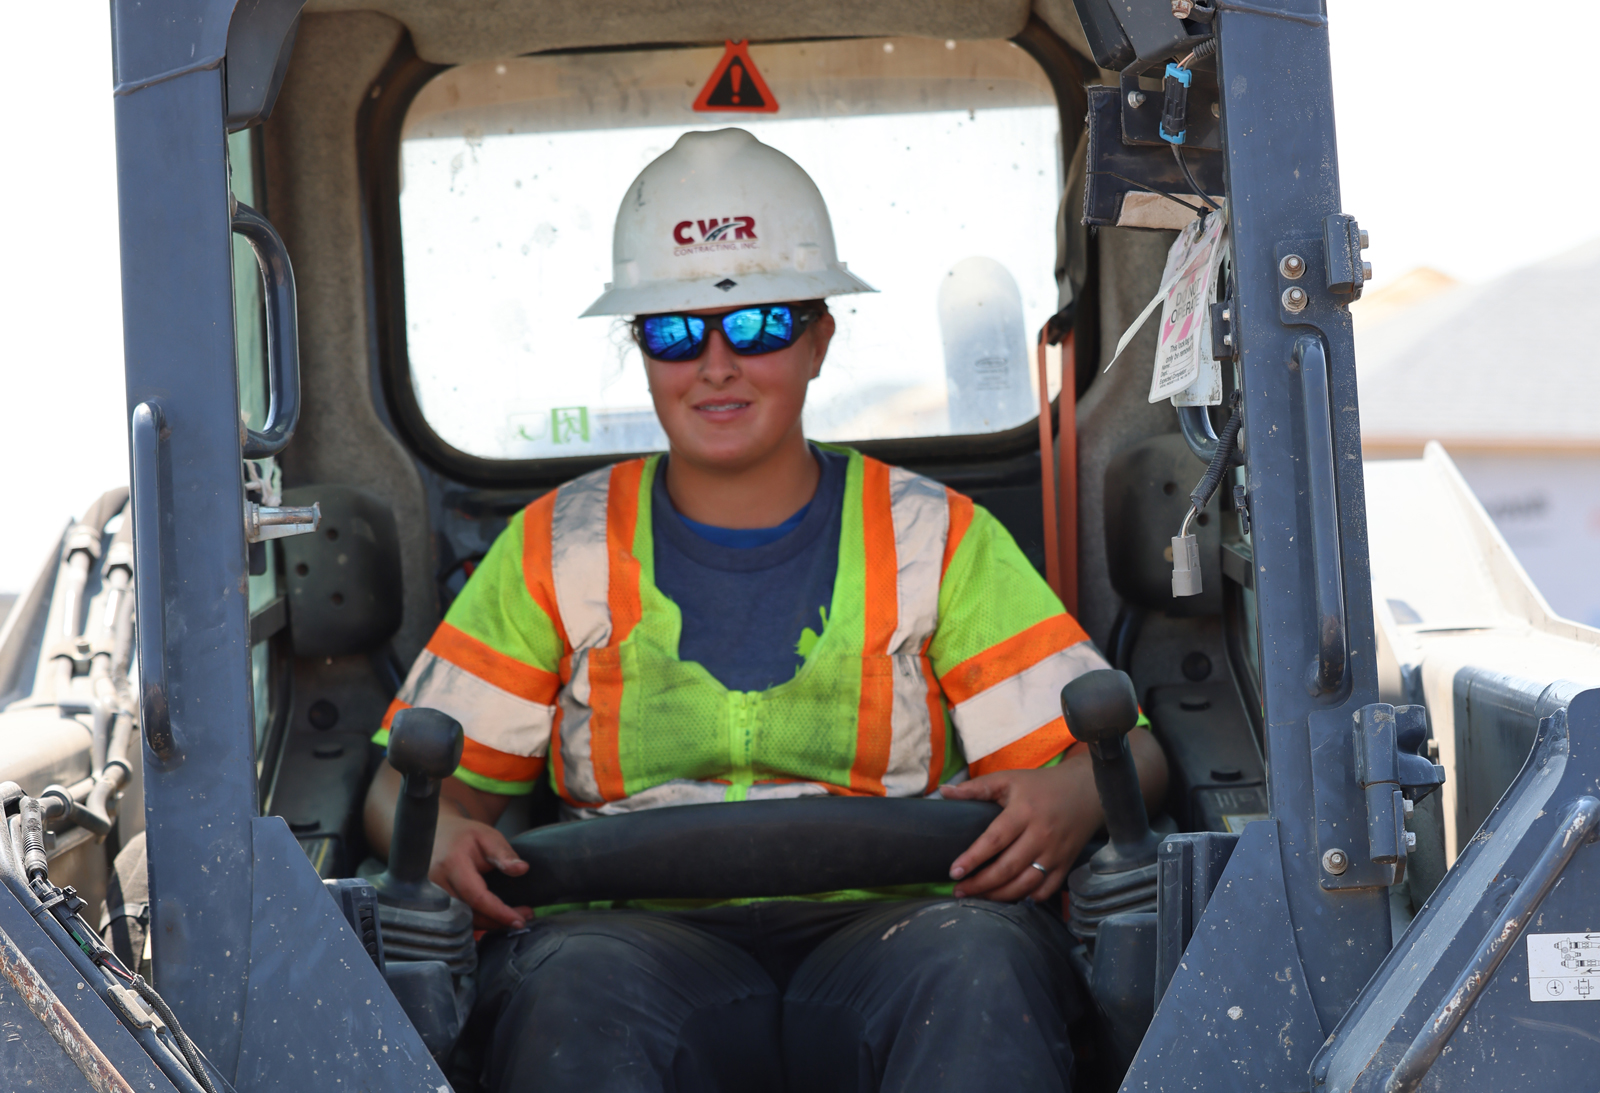 cwr contracting employee smiling sitting in a front loader